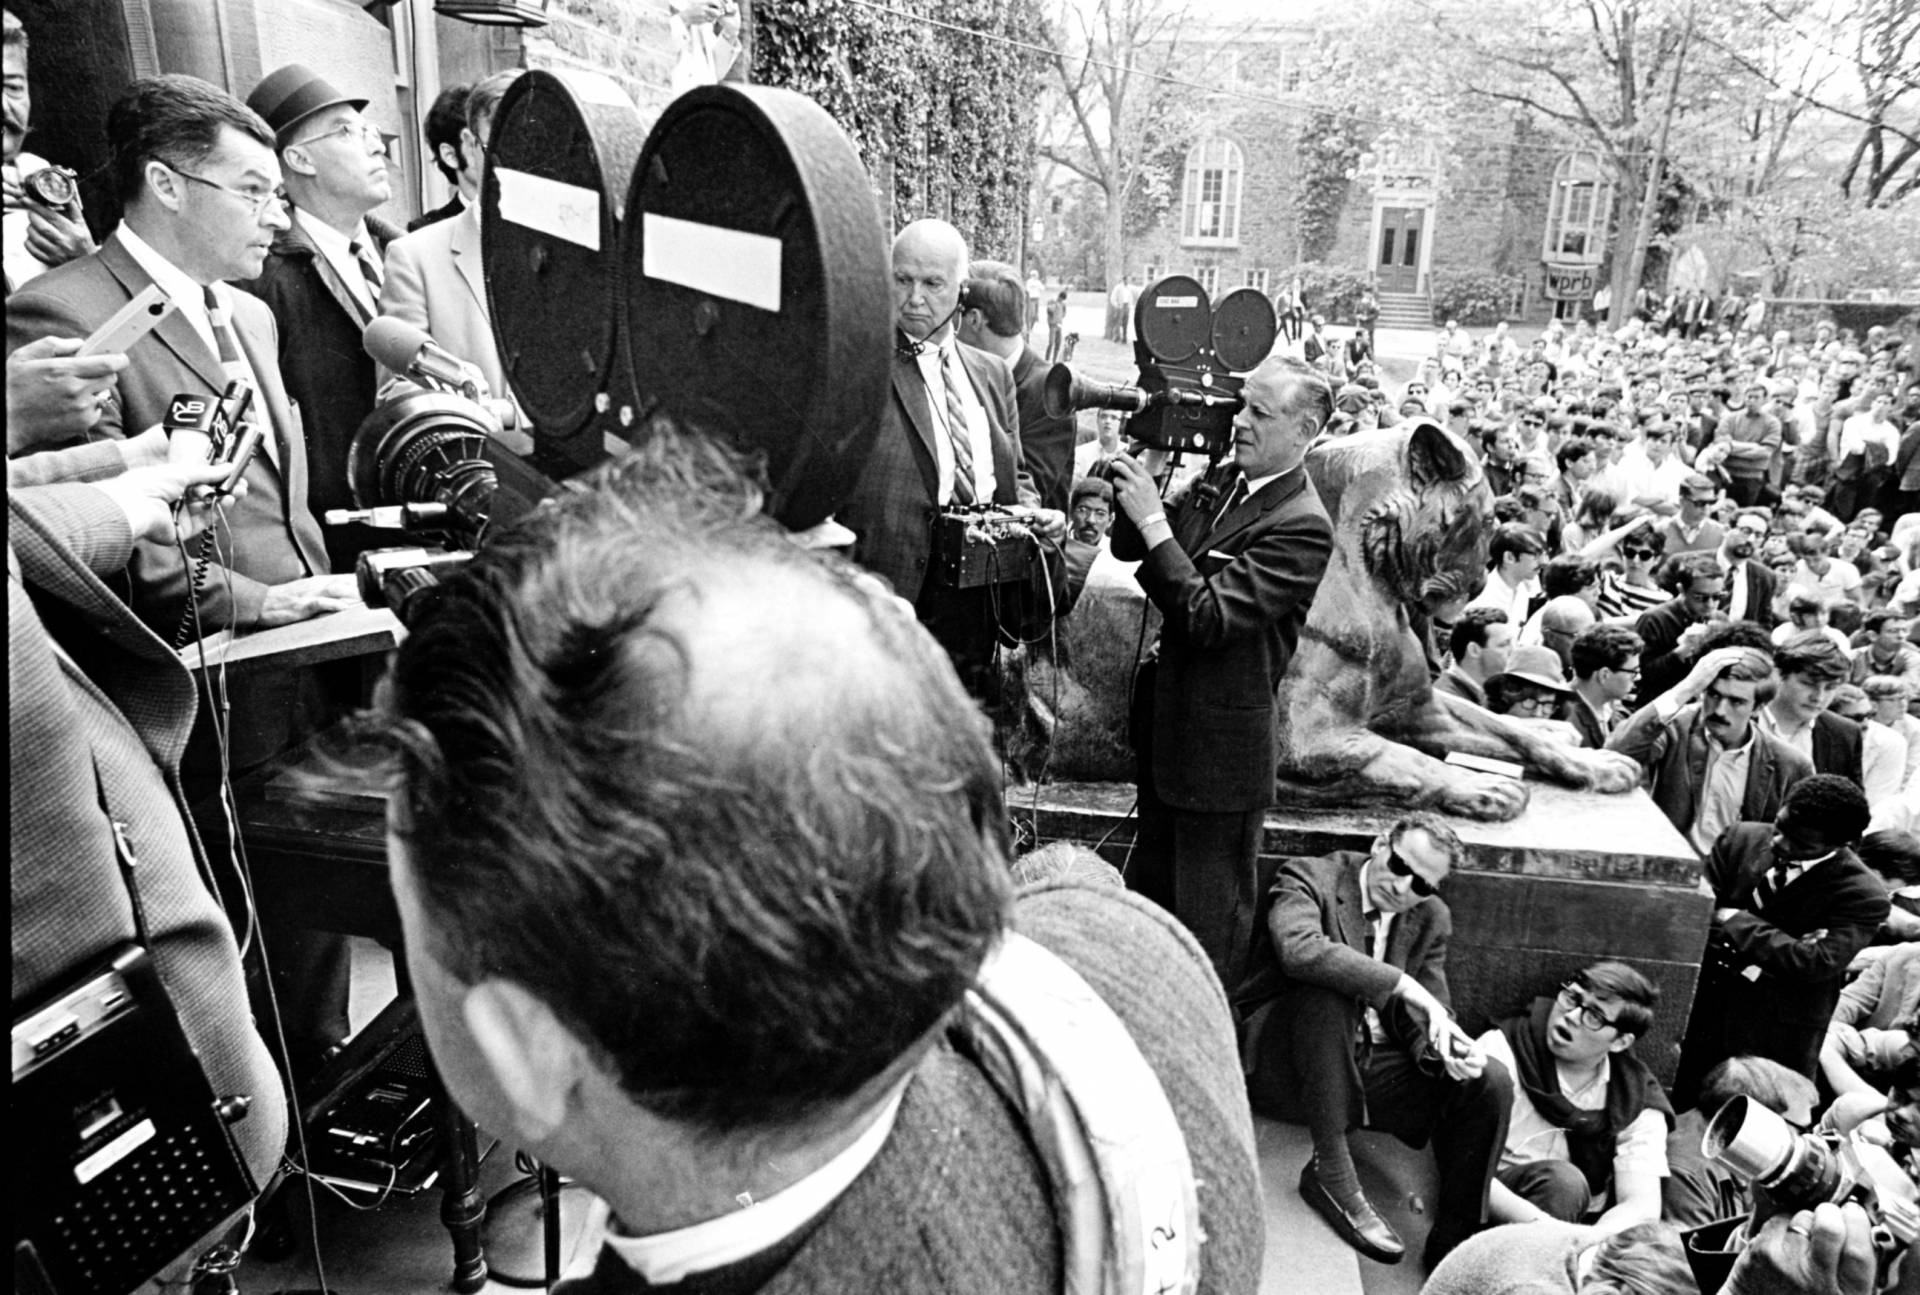 archival photo showing Robert F. Goheen addressing a crowd protesting the Vietnam War